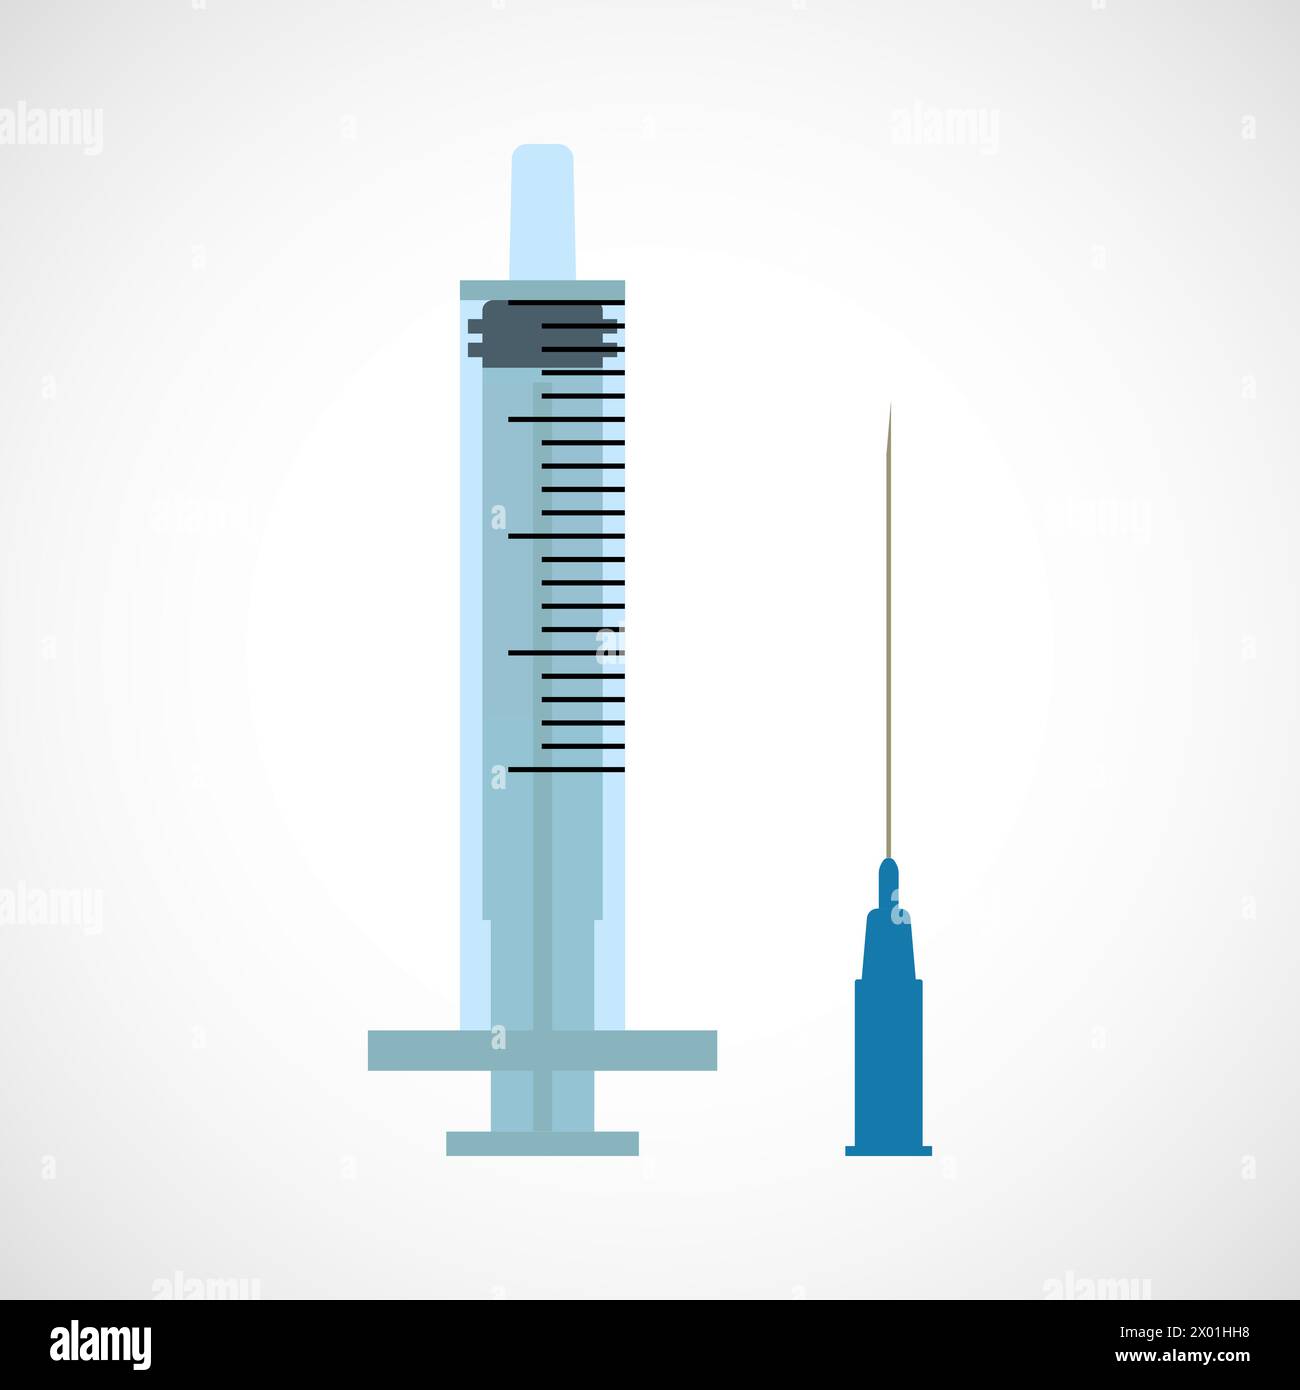 Syringe without injection and needle. Medical instrument. Single-use sterile syringe on a white background. Vector illustration. Stock Vector